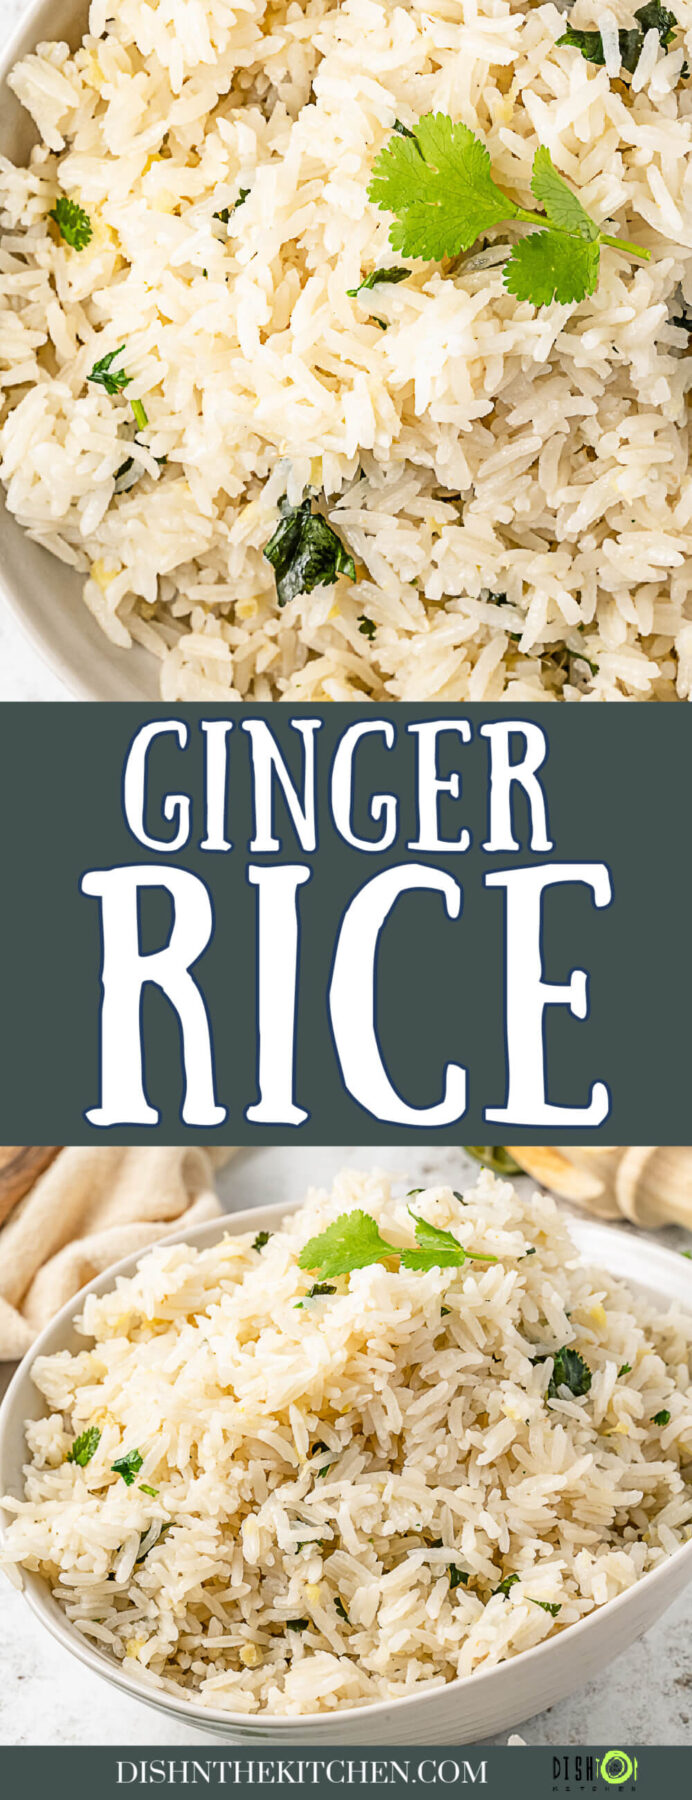 Pinterest image featuring bowls full of Ginger Rice accented by bits of garlic, ginger, and fresh cilantro.